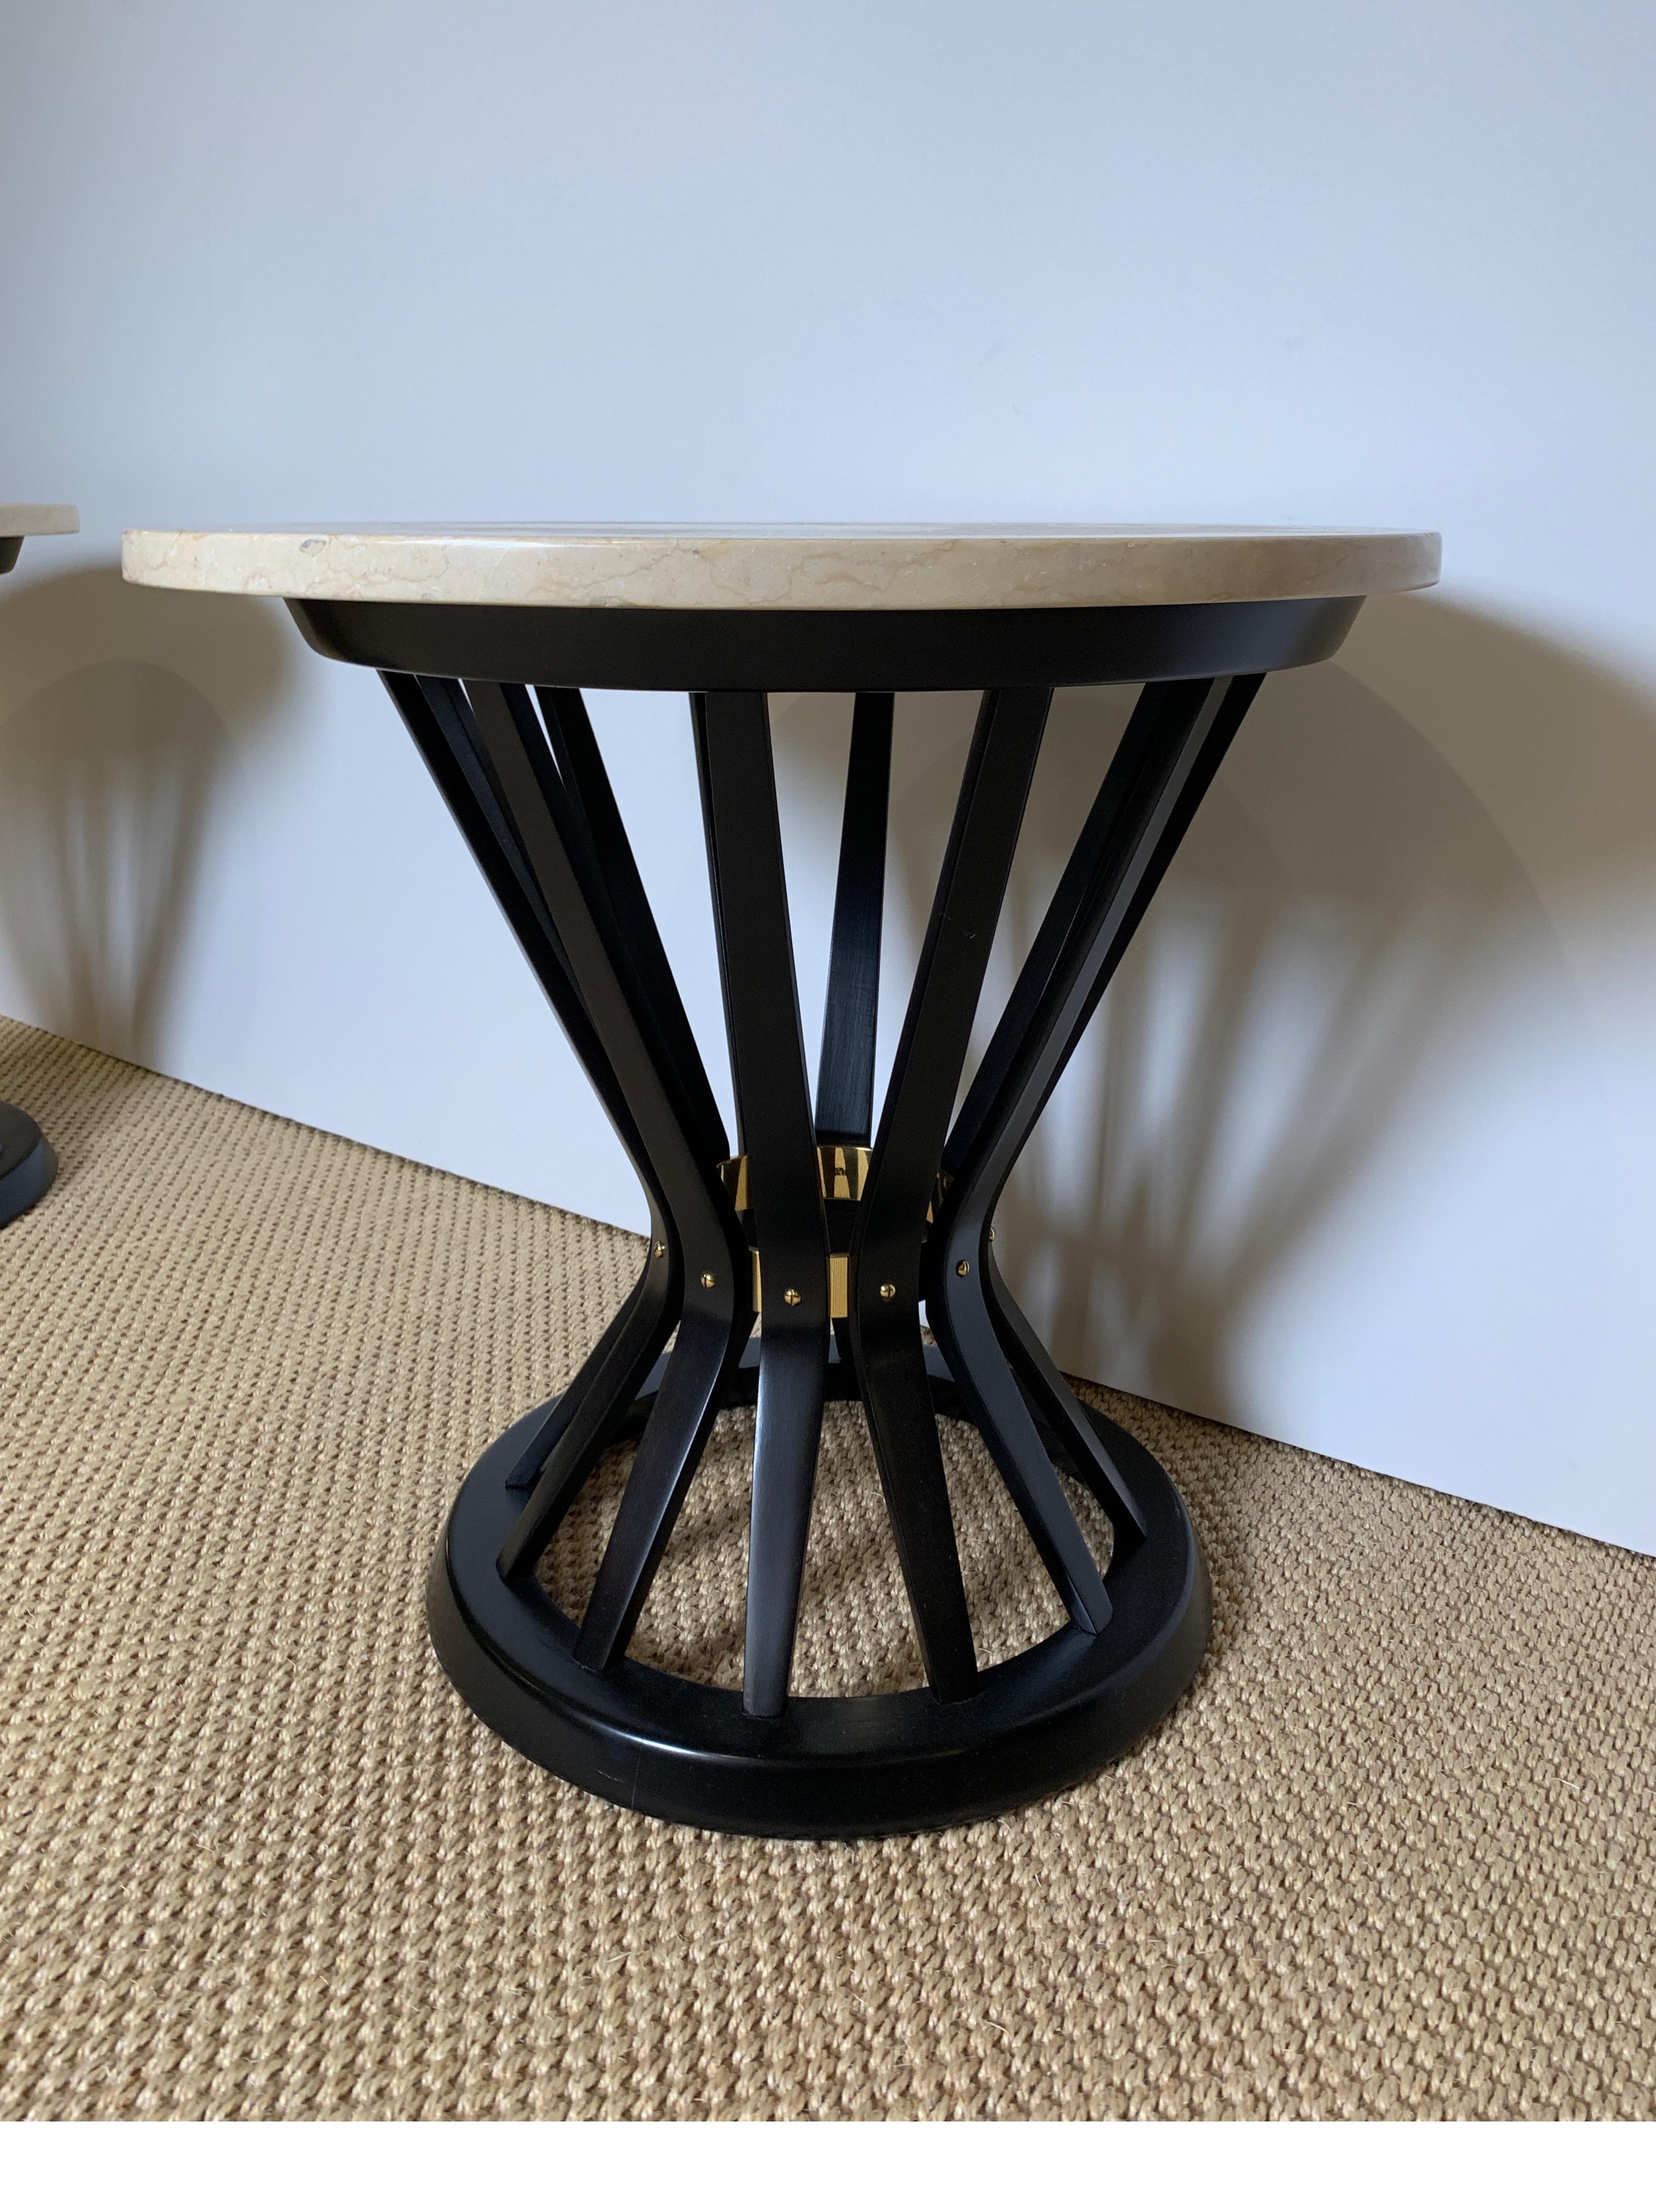 Pair of Ebonized Side Tables with Travertine Tops by Edward Wormley for Dunbar 1